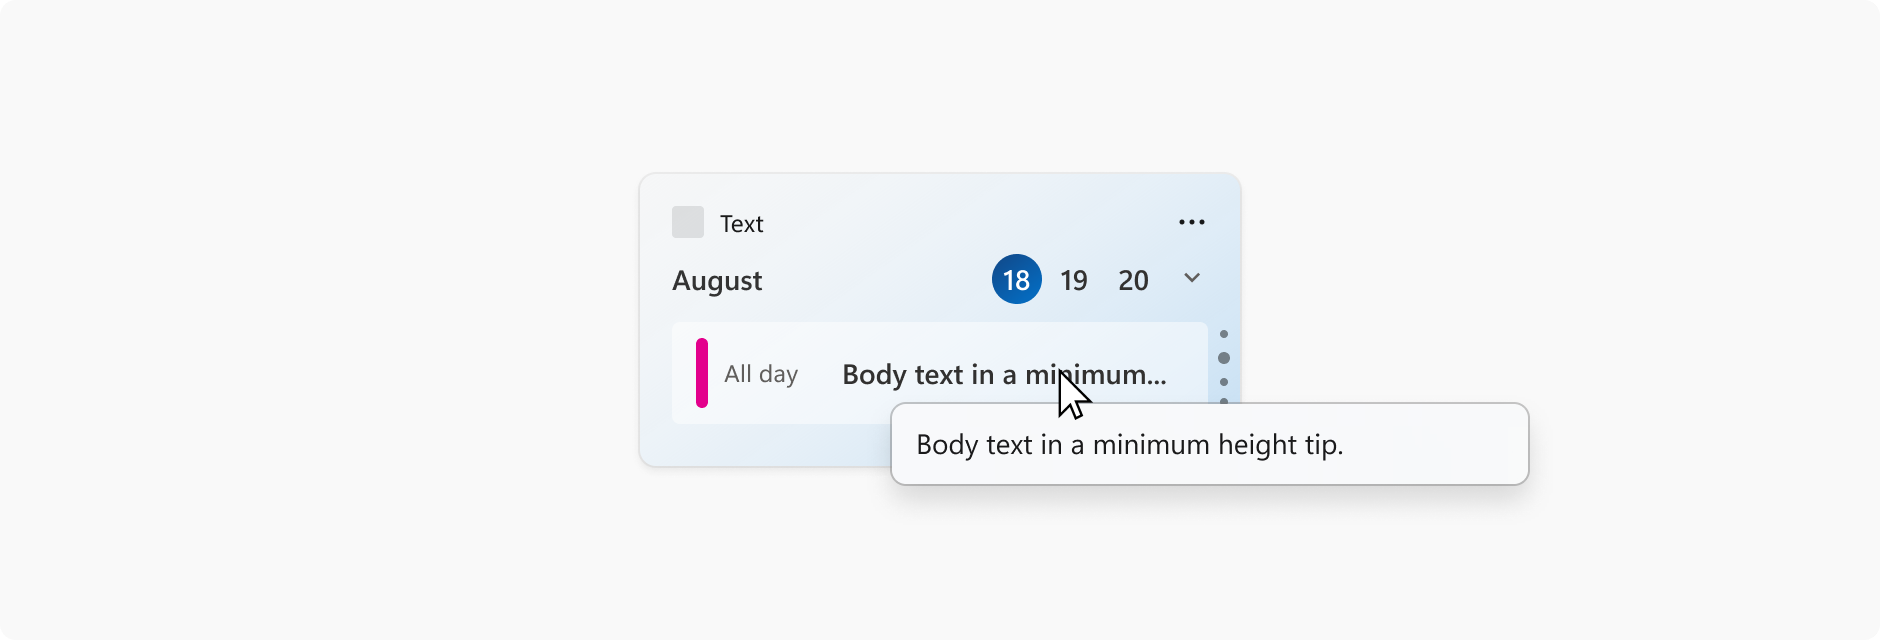 An image of a calendar widget showing a calendar appointment. The mouse cursor is hovering over the appointment subject line, which is truncated, and a tool-tip shows the full subject line.